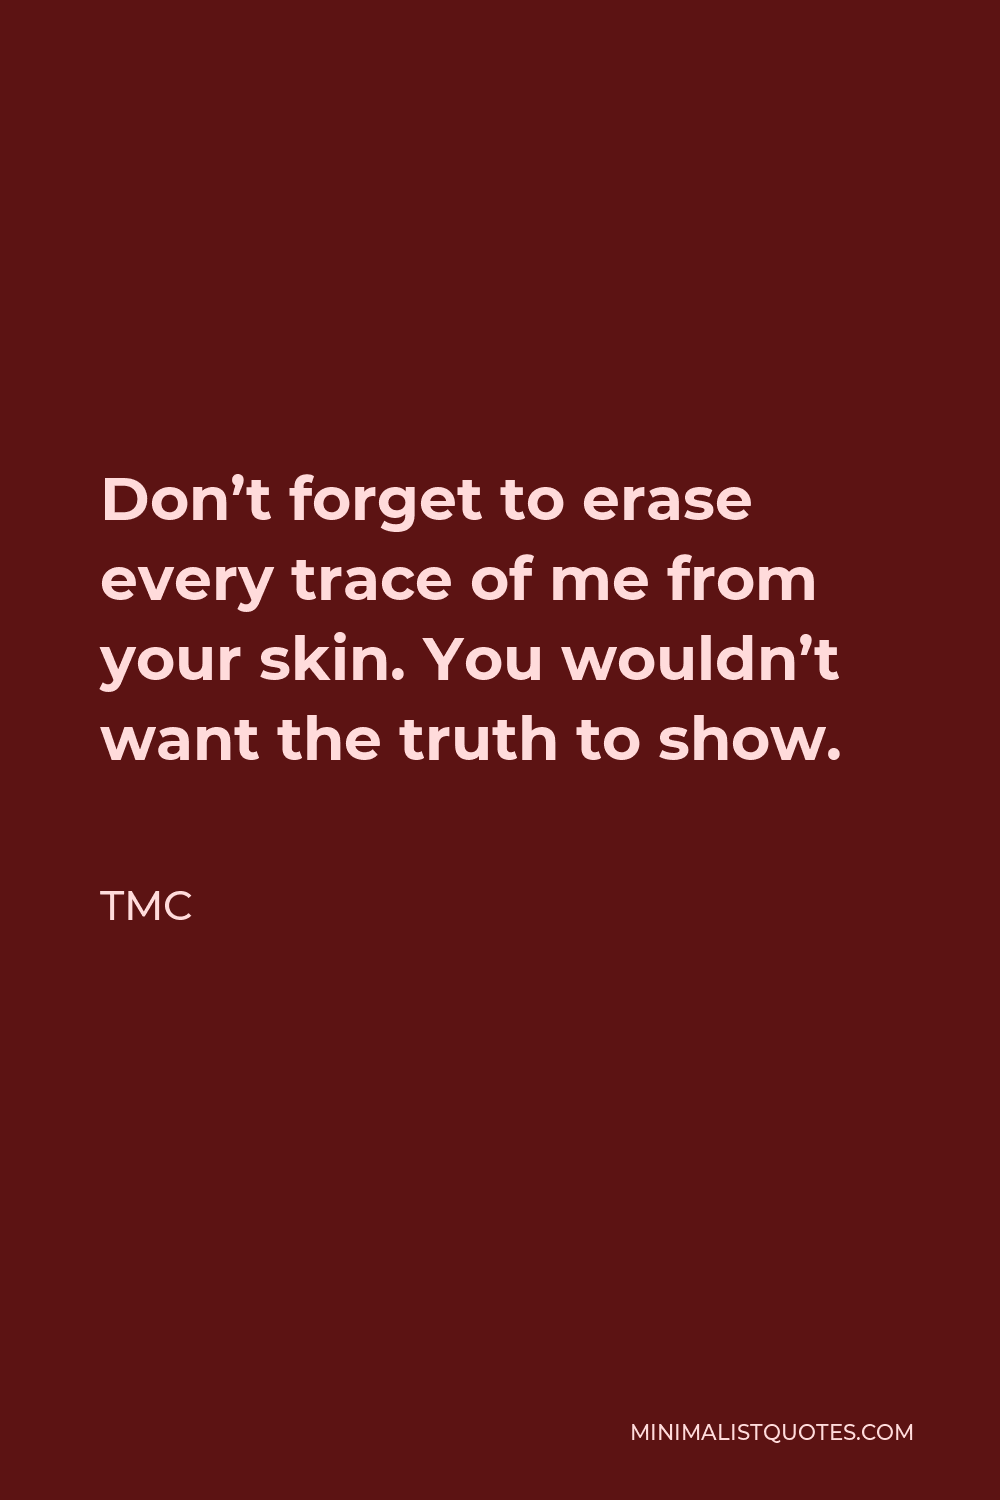 TMC Quote - Don’t forget to erase every trace of me from your skin, You wouldn’t want the truth to show.